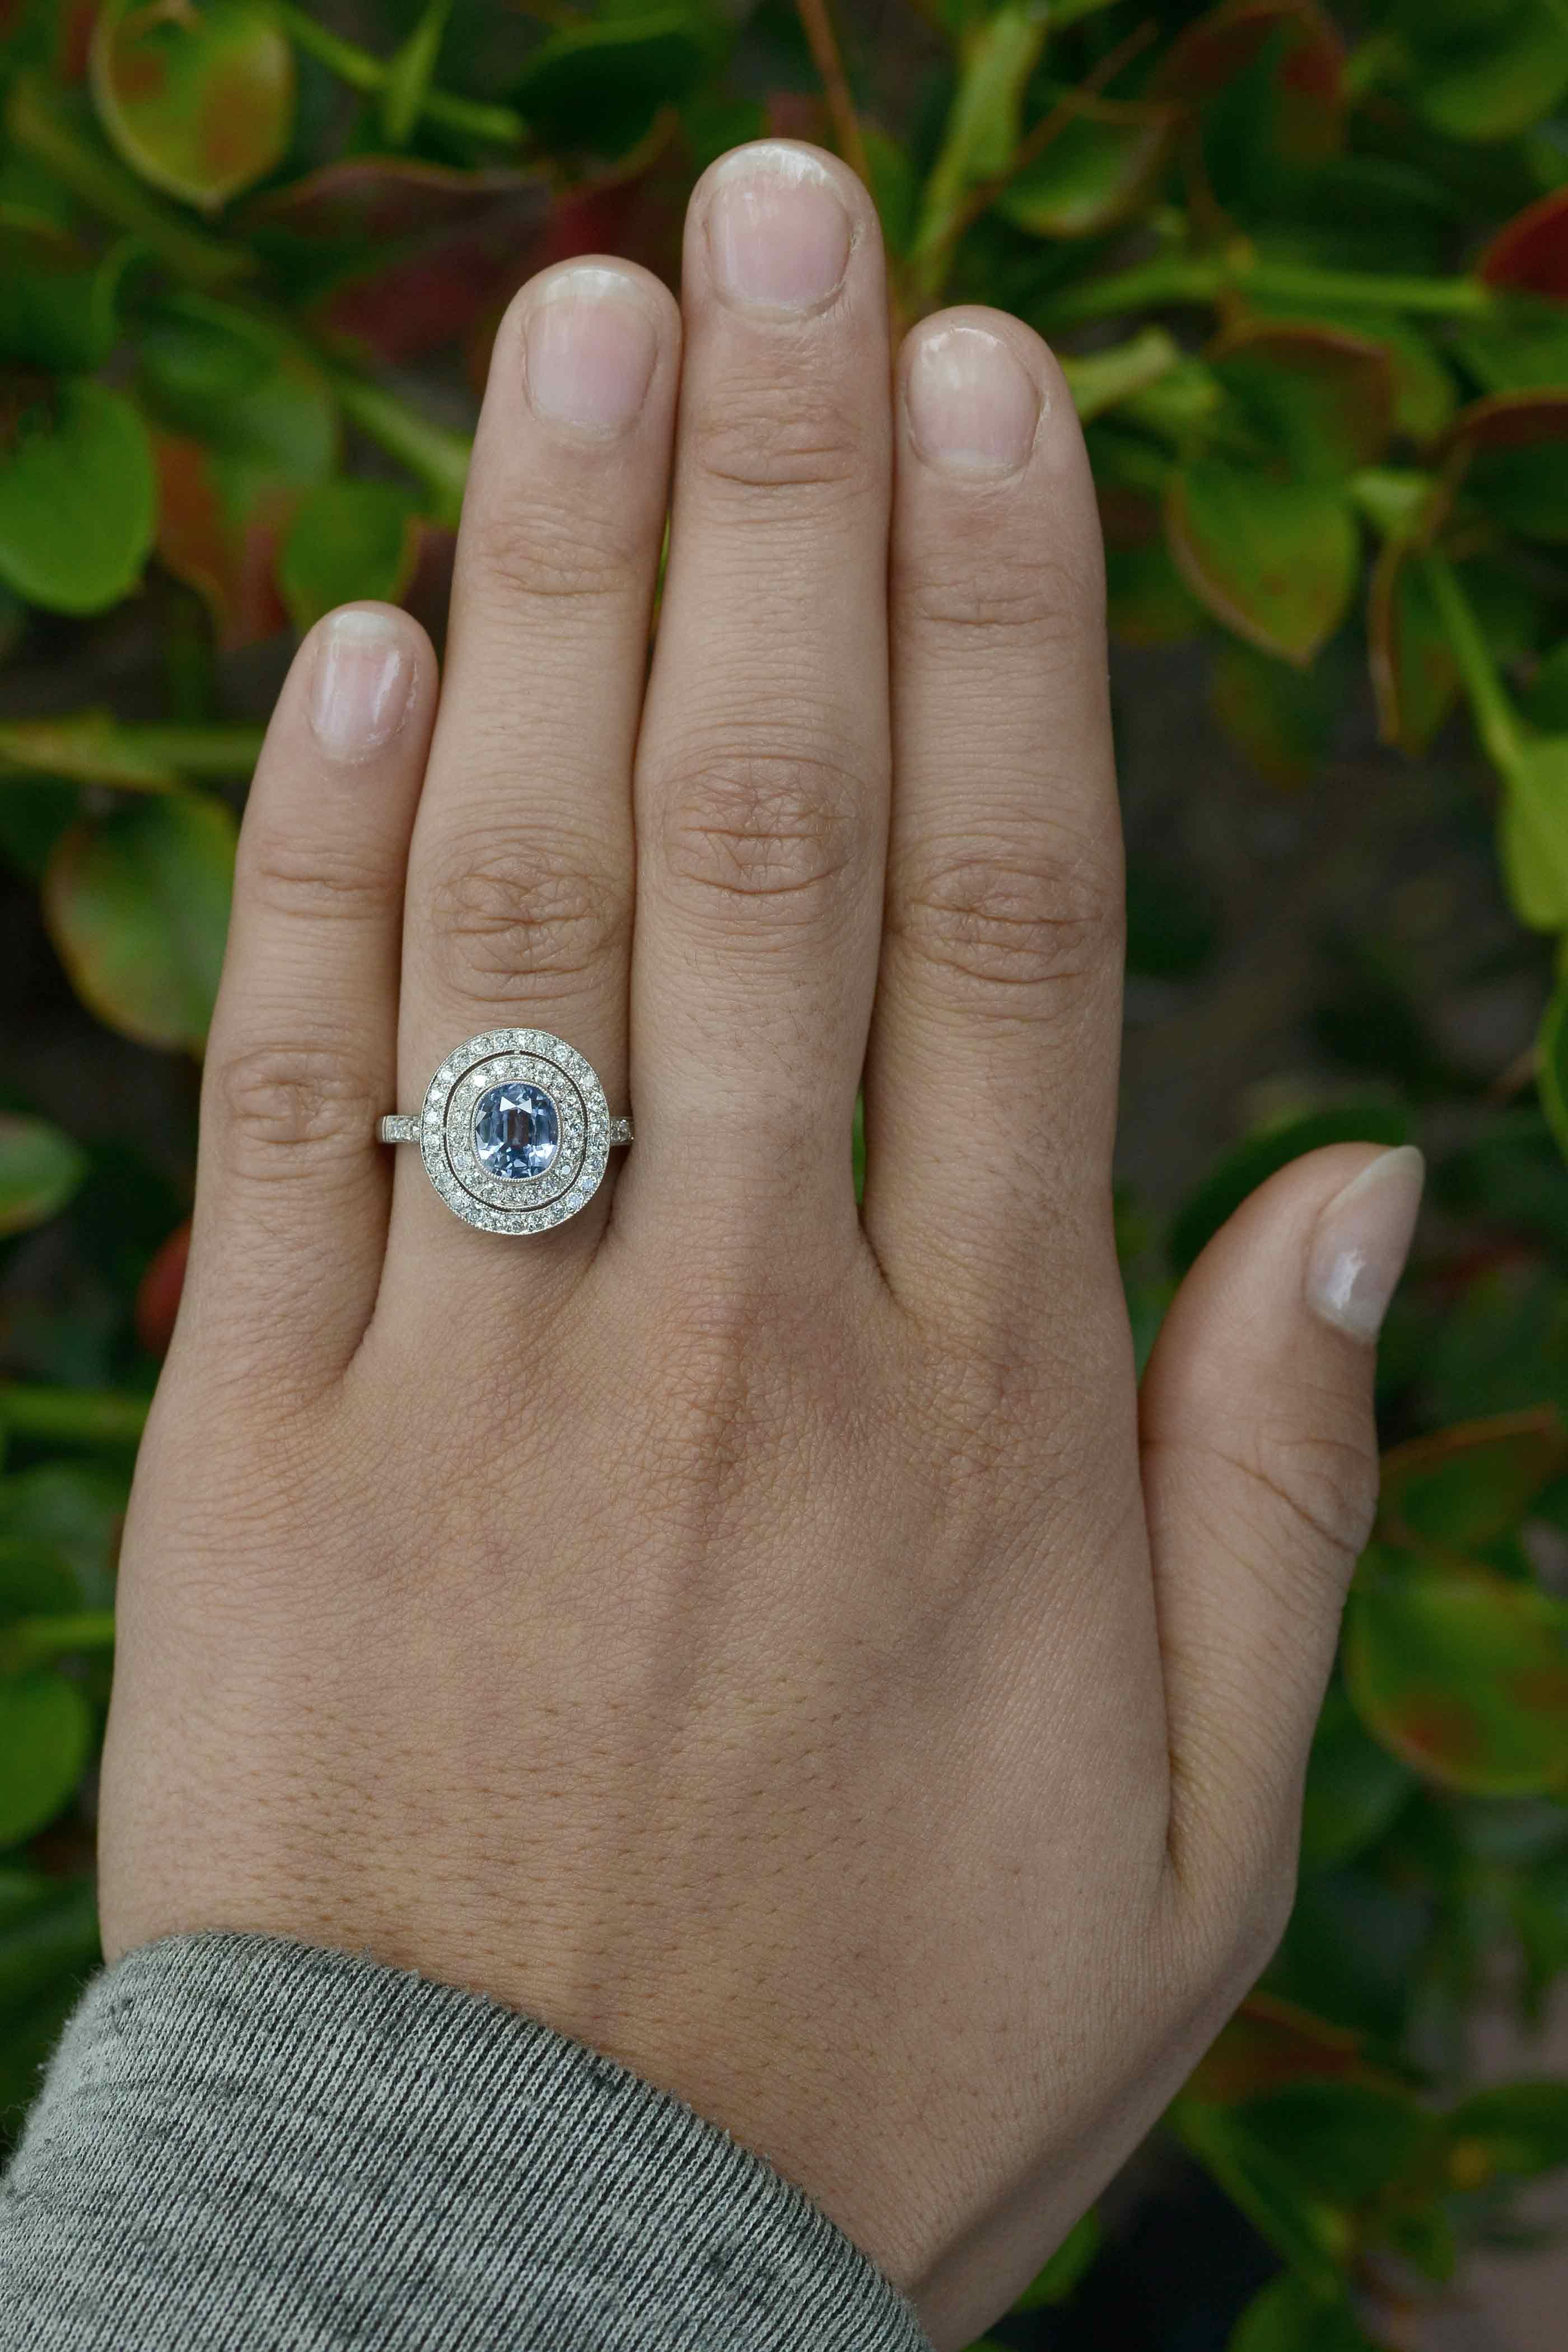 A lovely estate sapphire engagement ring, centered by a a shimmering shade of cornflower blue, the Ceylon sapphire framed by a double diamond halo that adds a brilliant contrast to this heirloom. At a sizable 1.62 carats of captivating luster, and